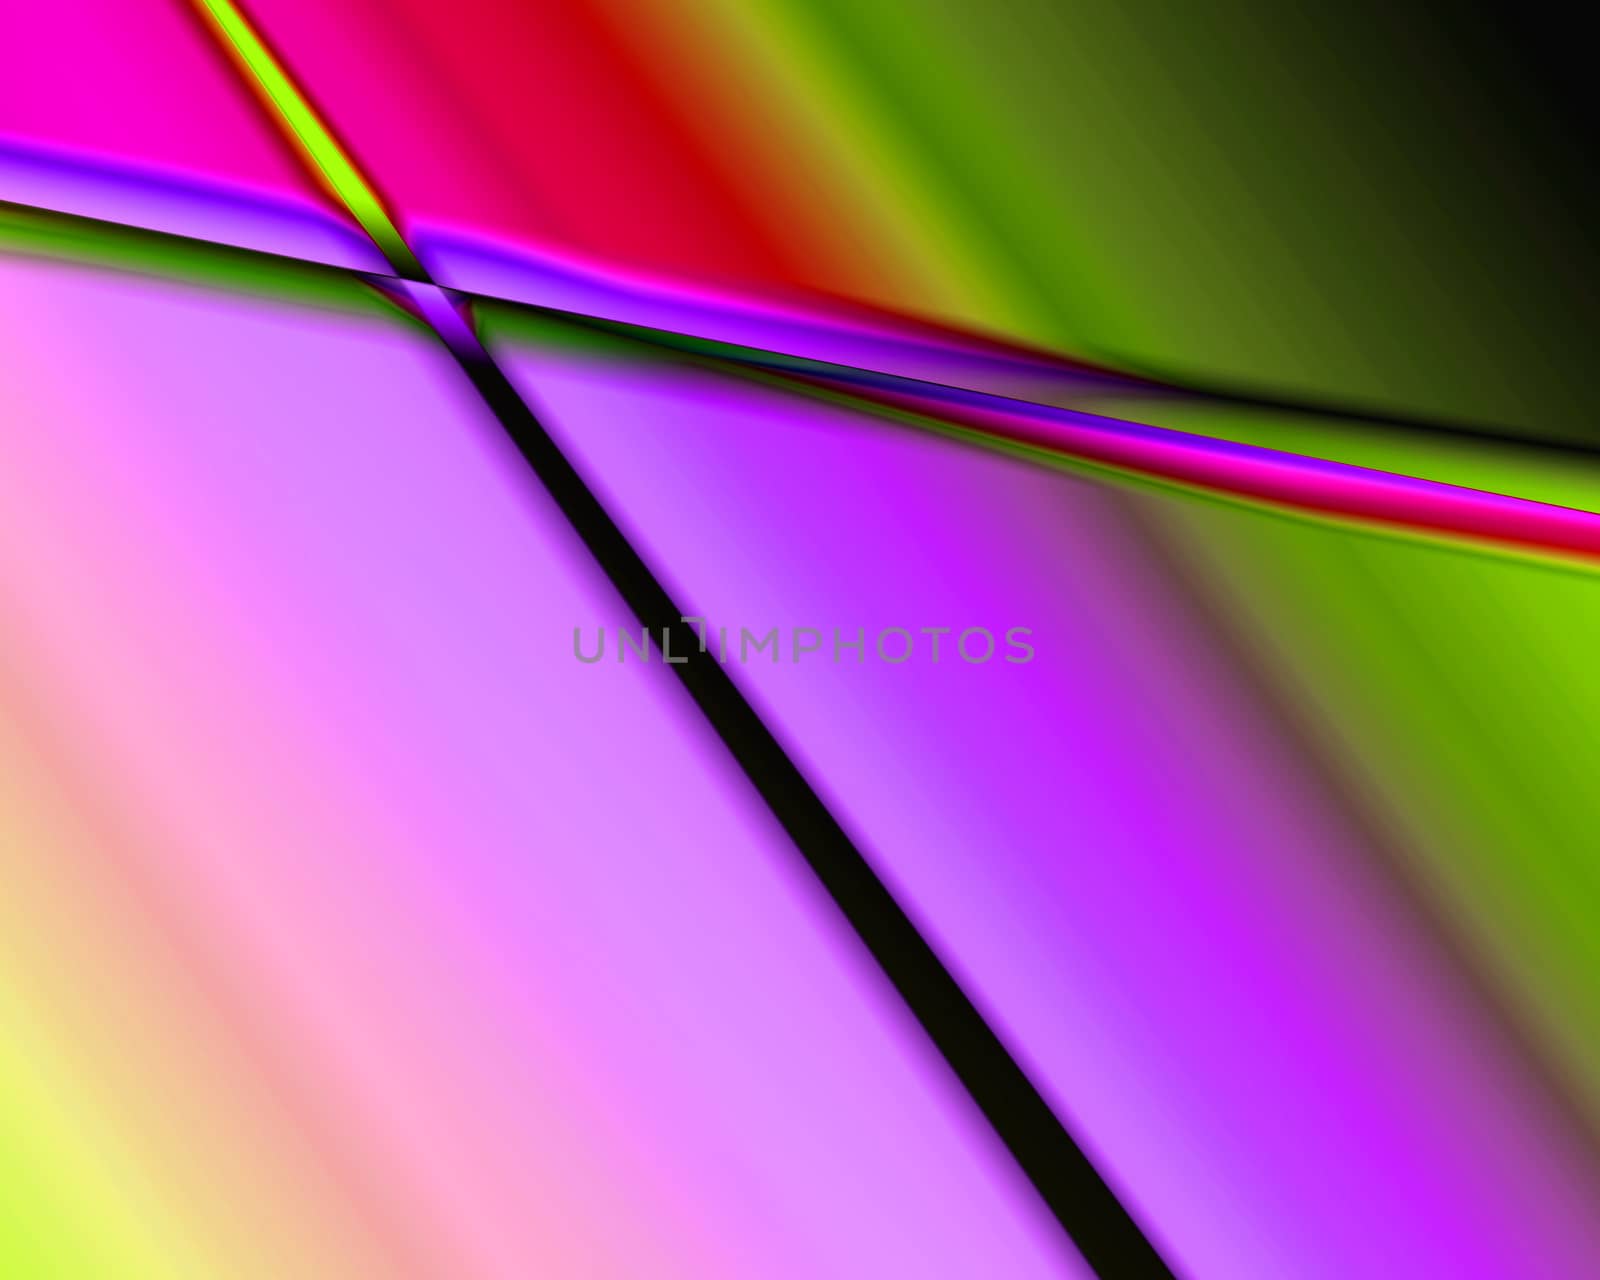 colorful glowing graphic abstract, geometric shapes, illustration for backgrounds and wallpapers, banners, rainbow line background color for the presentation and business